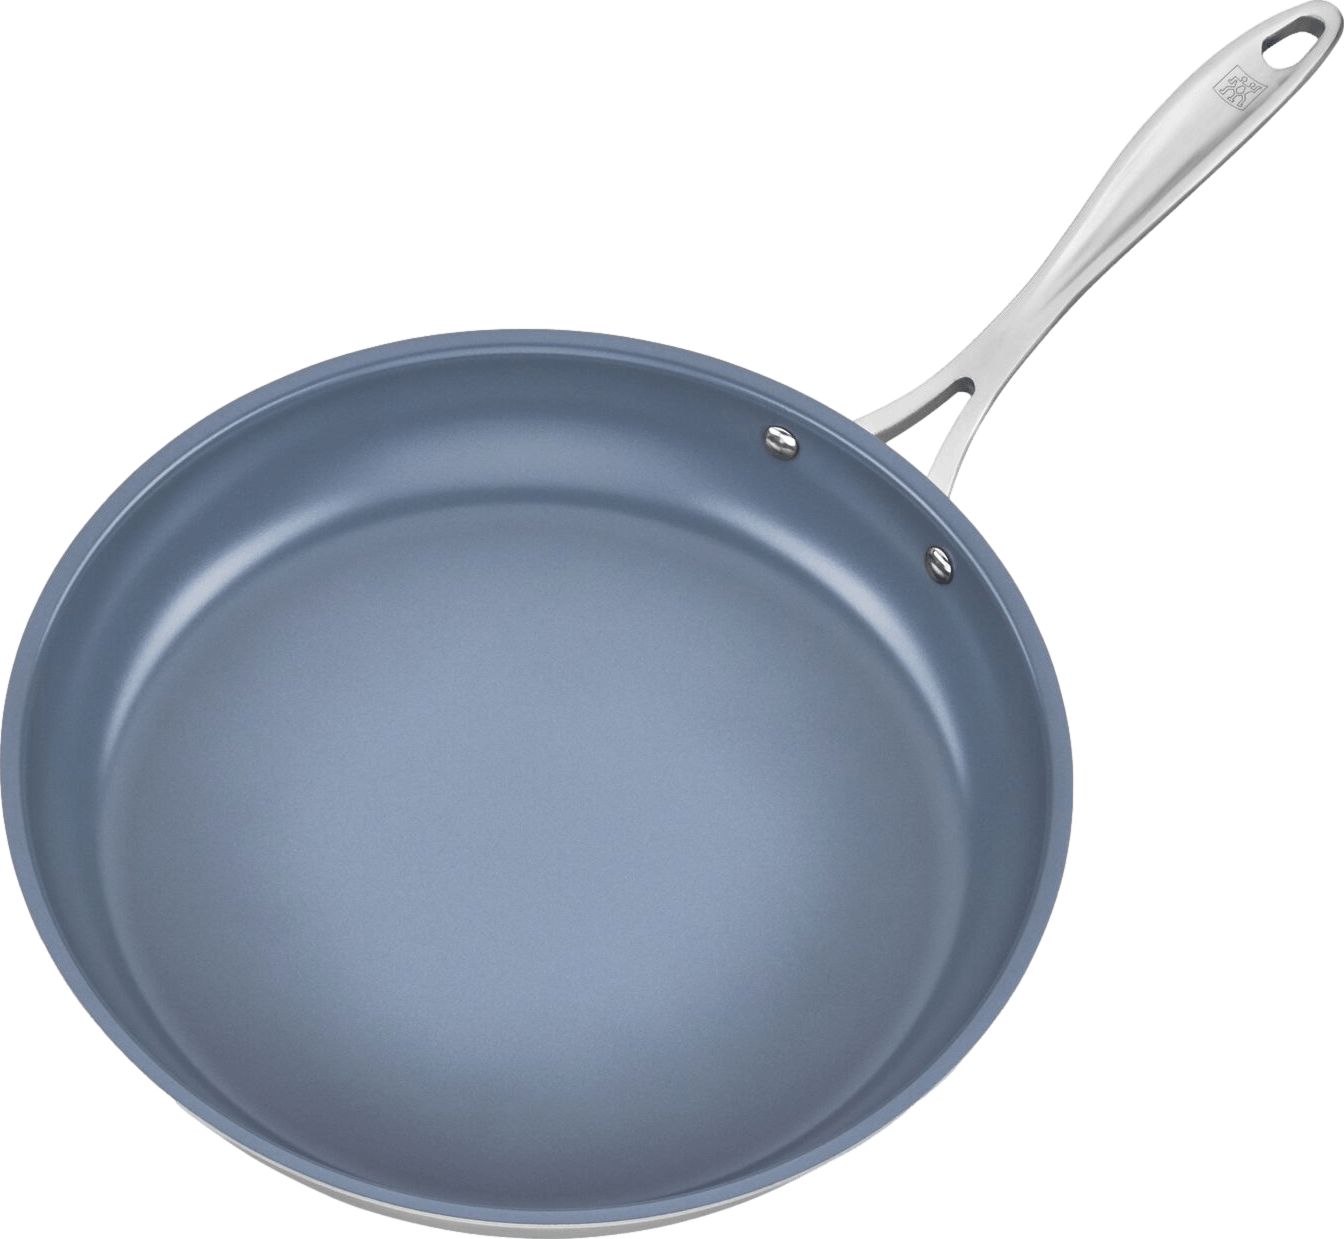 ZWILLING Spirit 3-ply 9.5 Stainless Steel Ceramic Nonstick Fry Pan with Lid